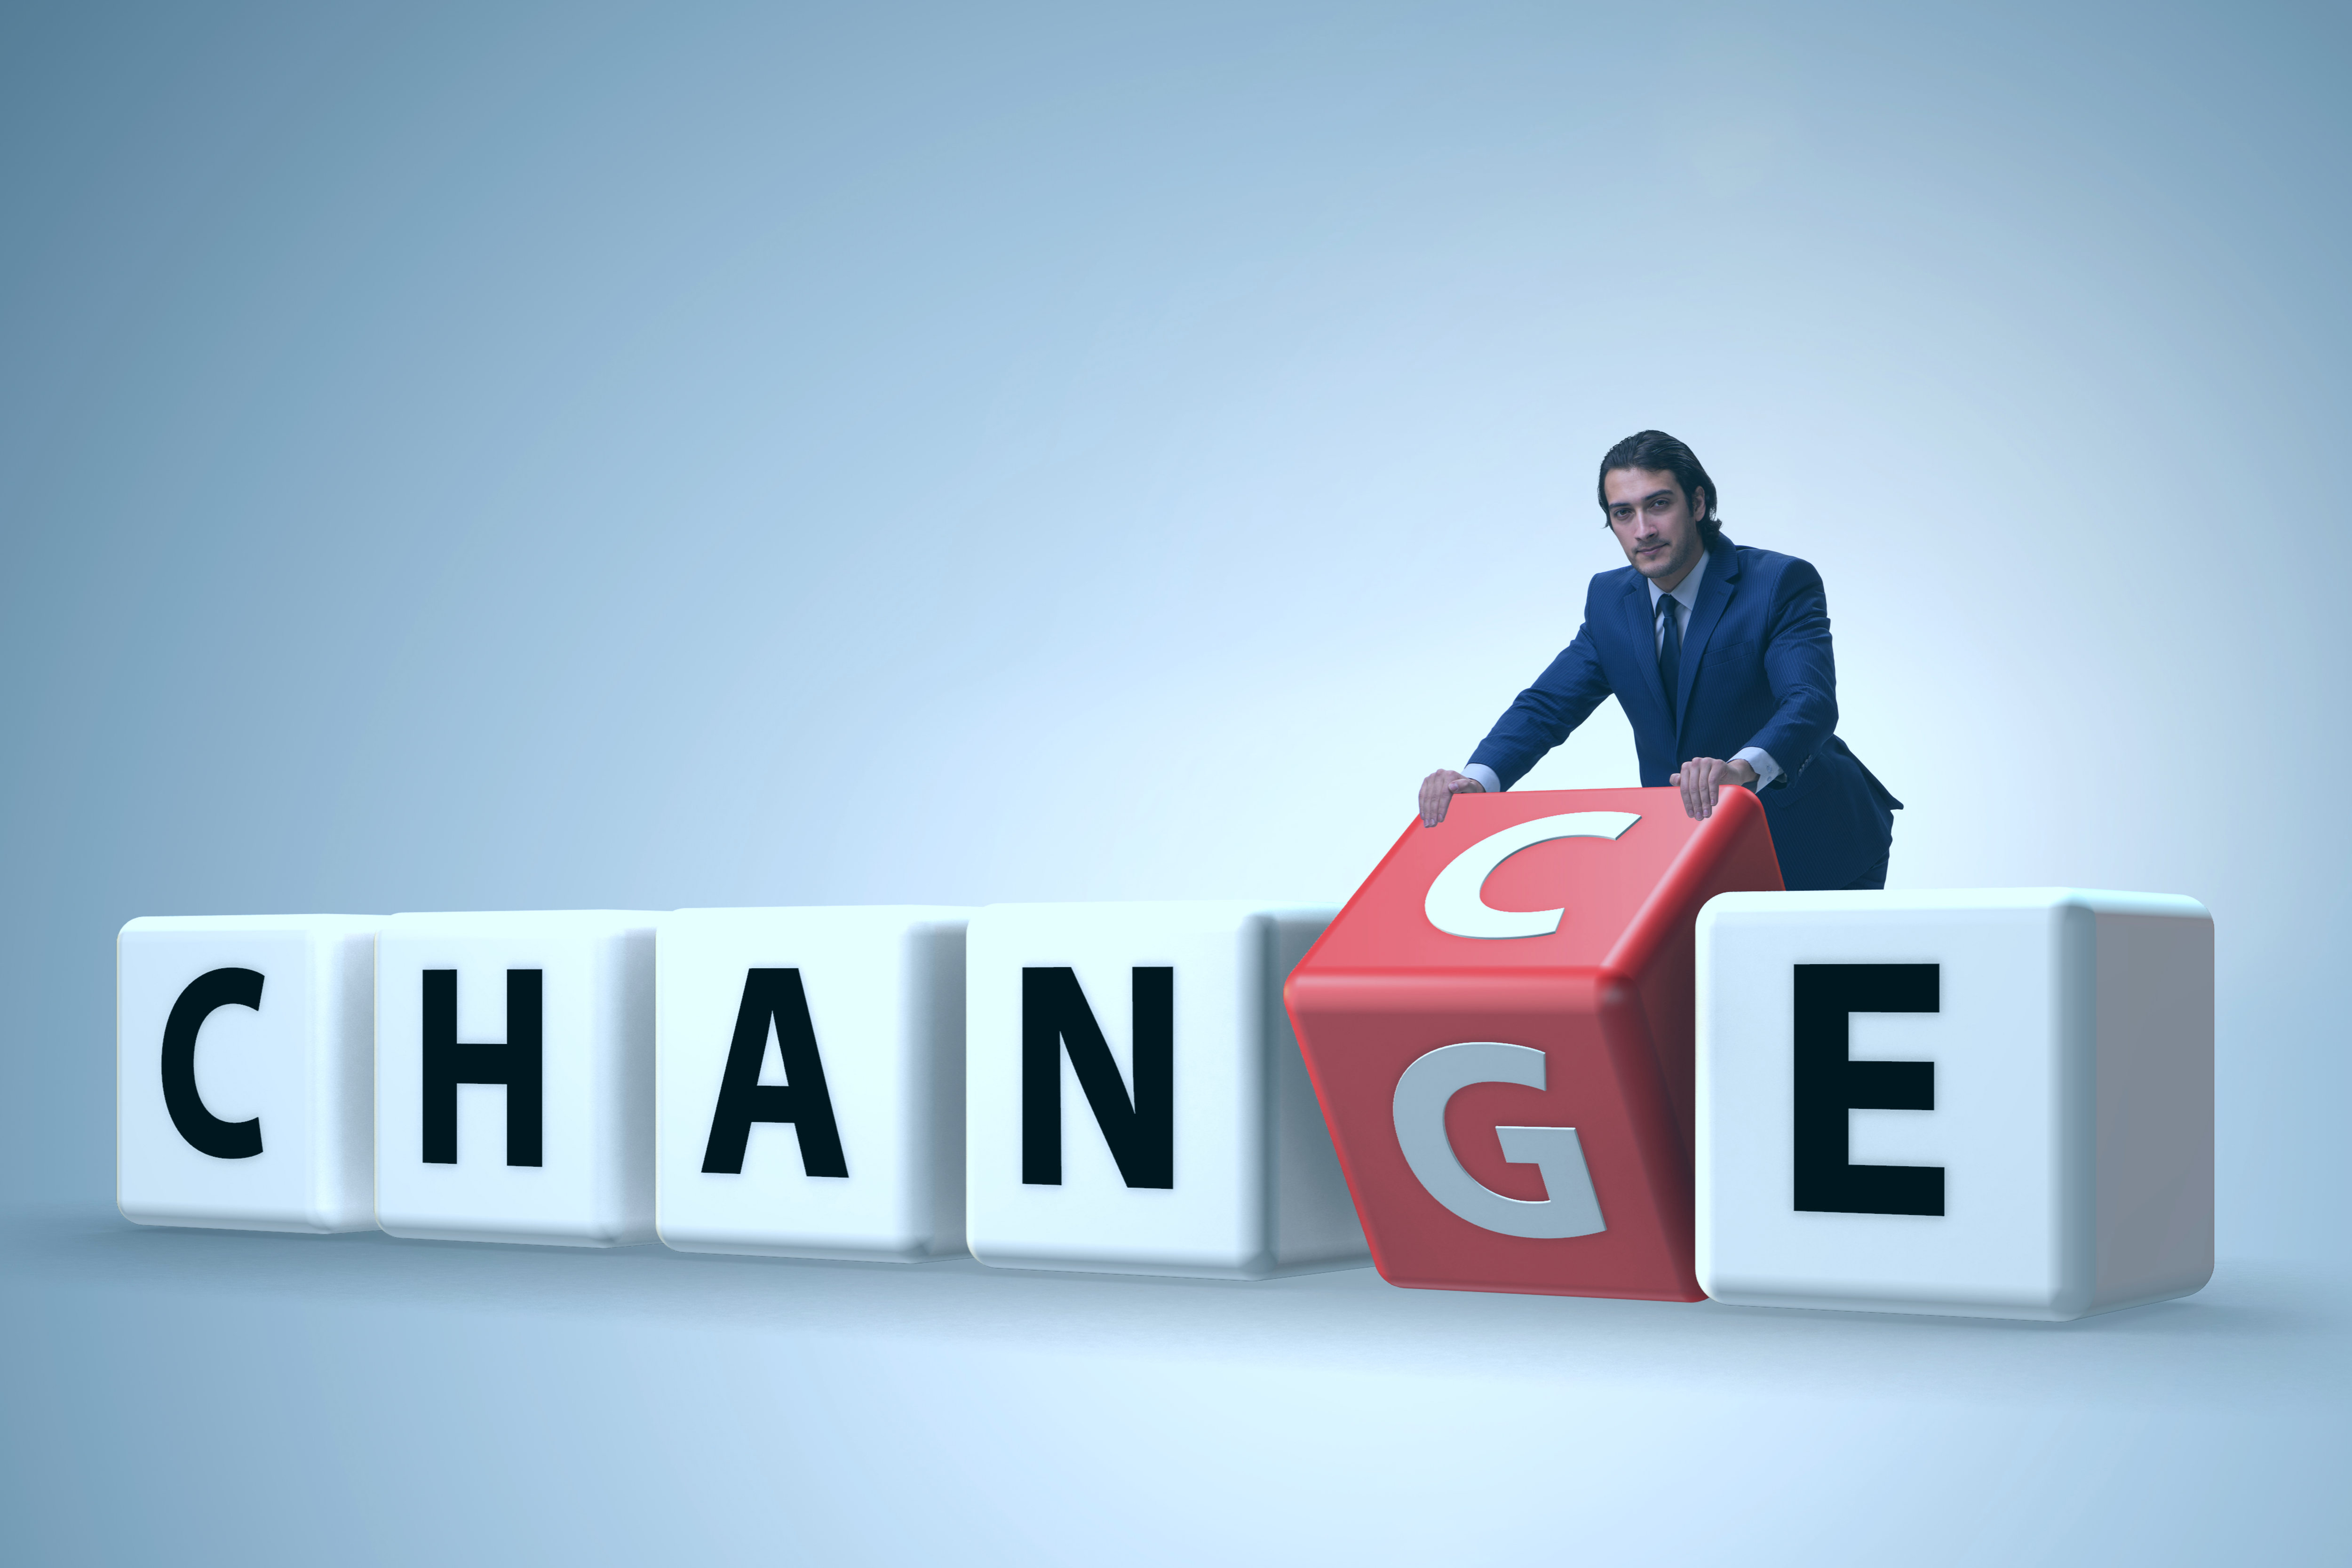 Salesperson taking a chance on change 